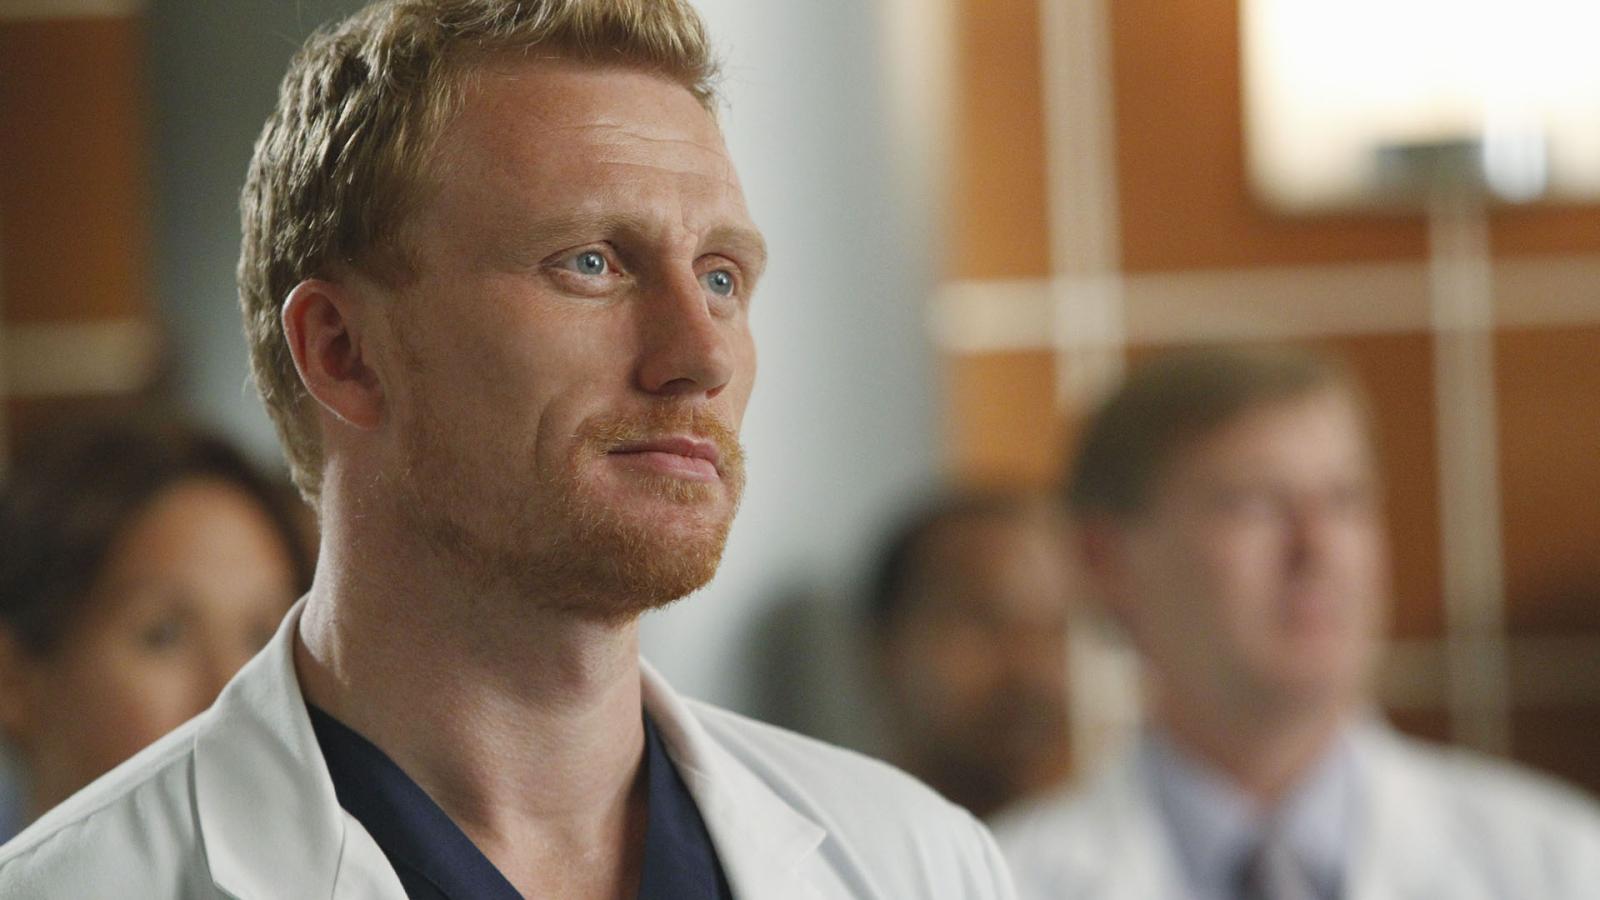 Which Grey's Anatomy Doctor Are You, Based on Your Zodiac Sign? - image 1